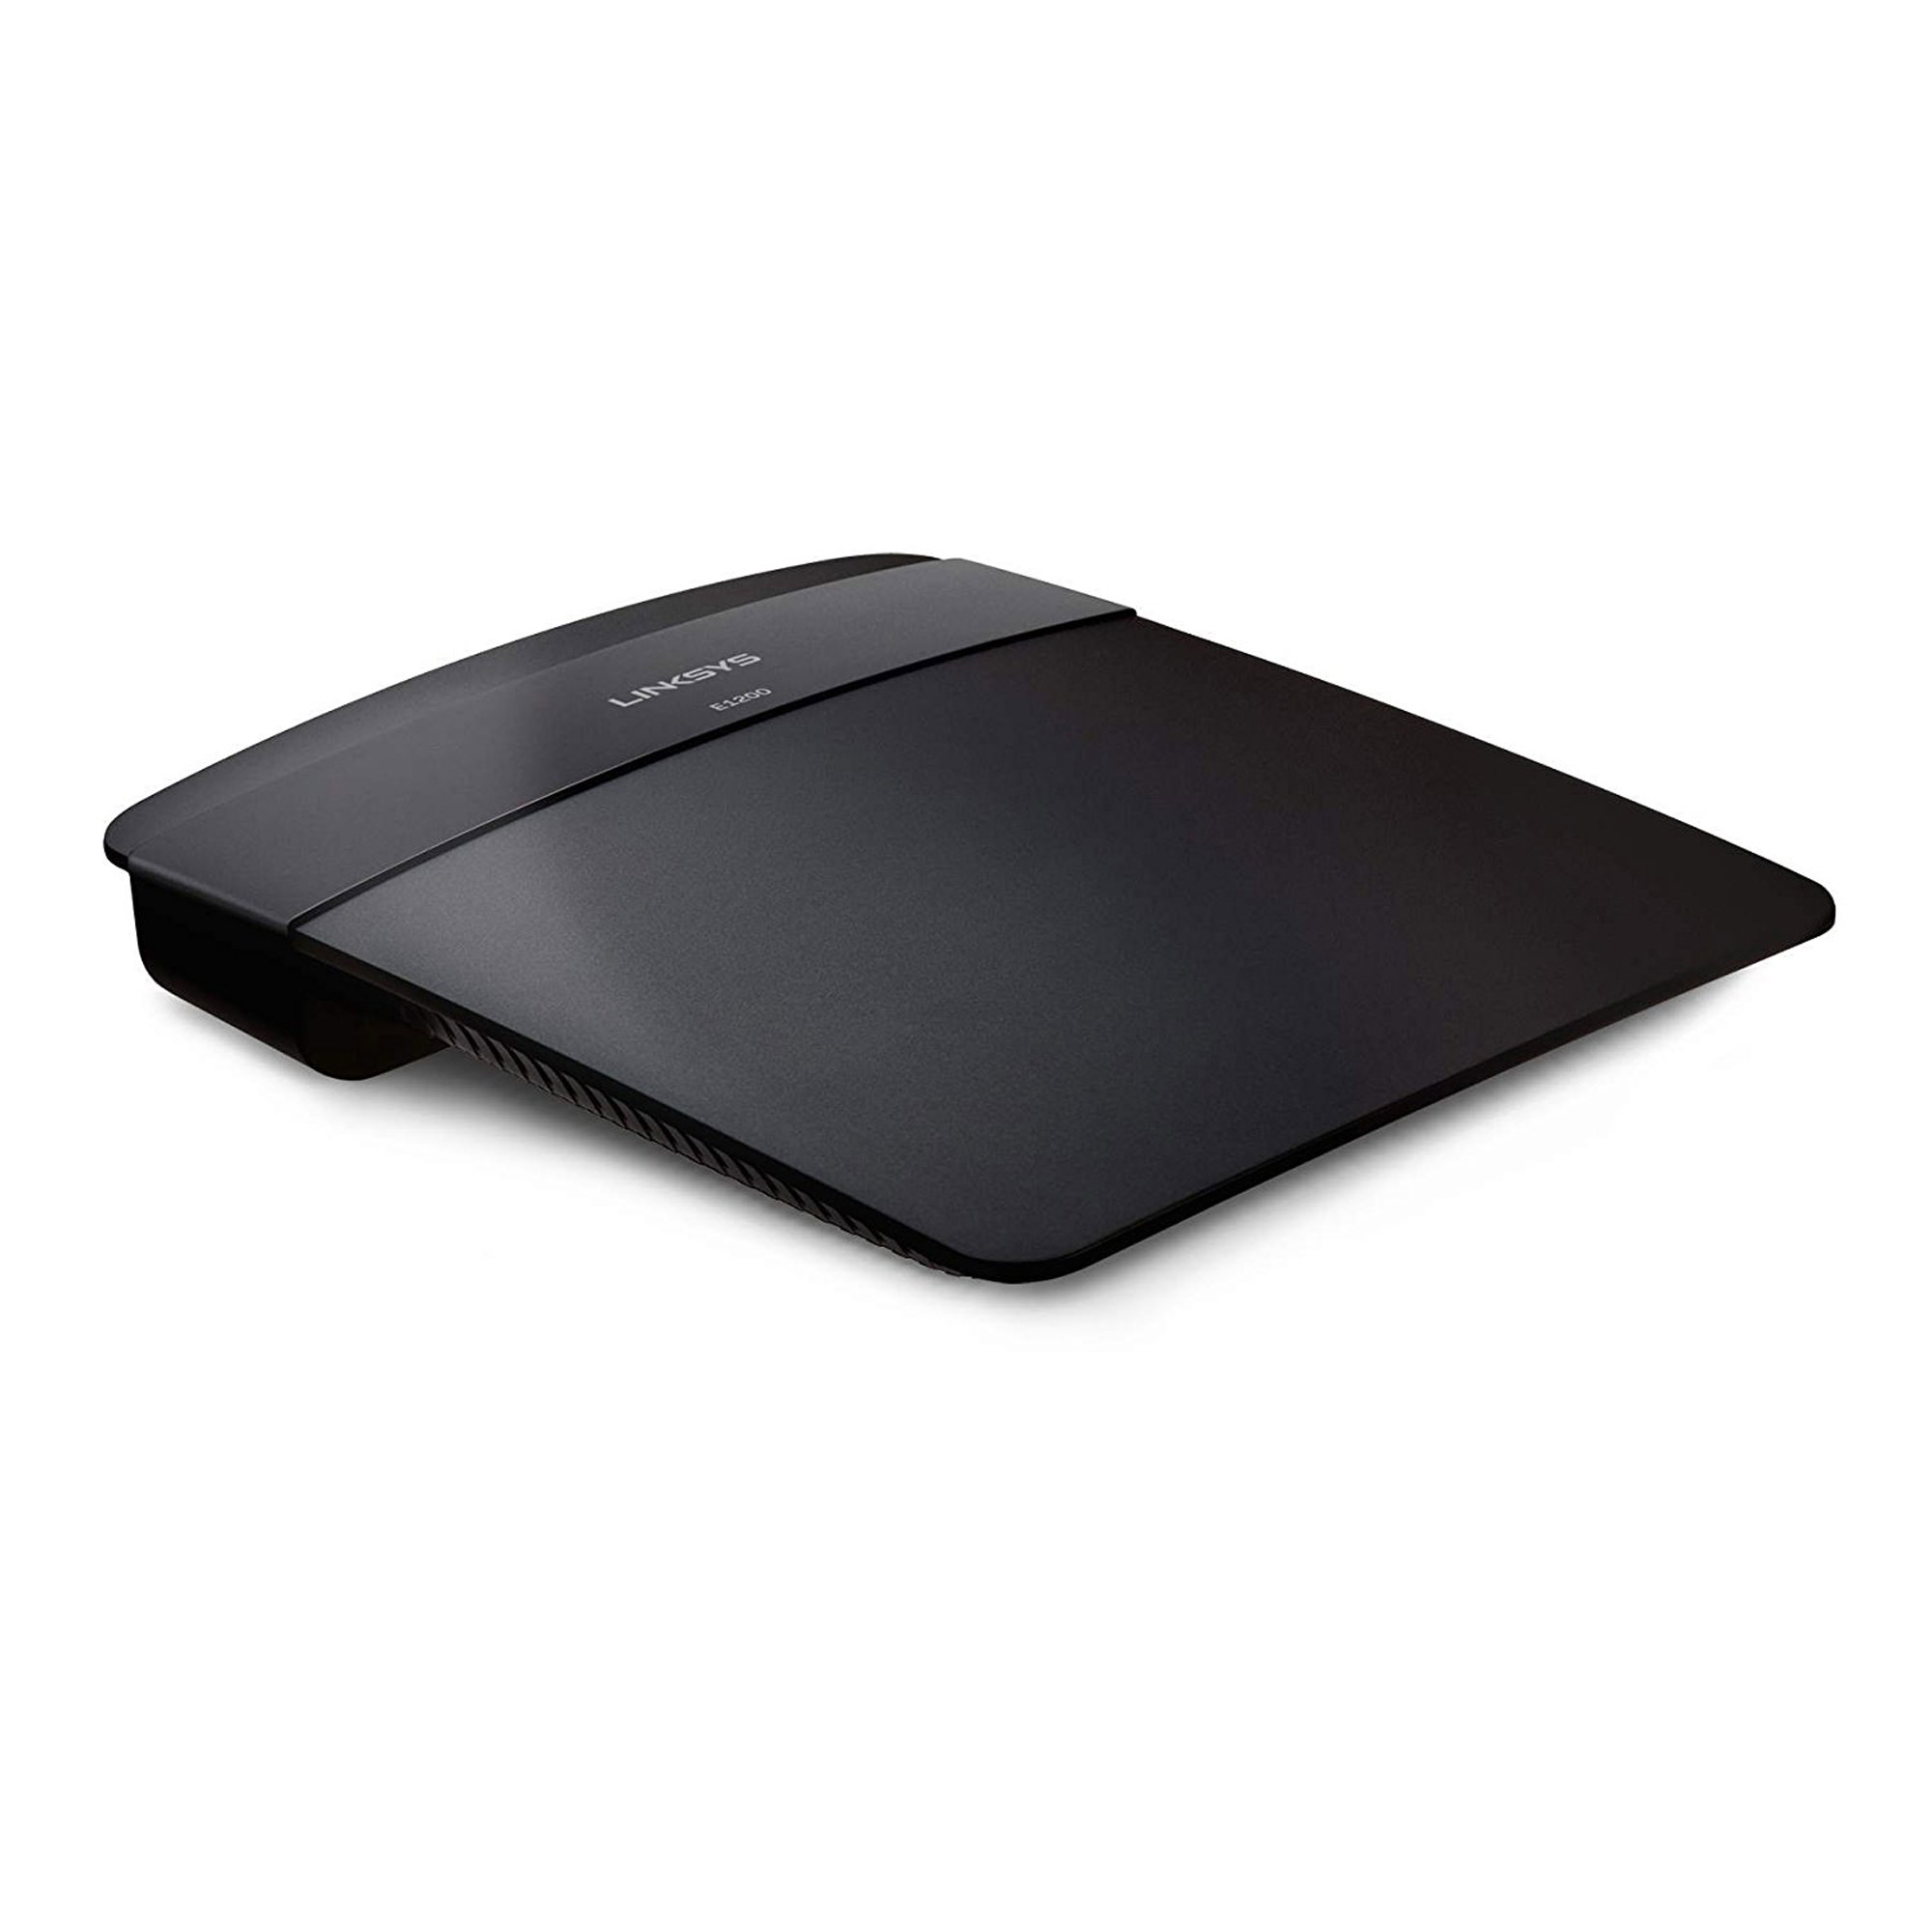 Linksys N300 Dual Band Wireless WiFi Router, Black (E1200) - image 2 of 3